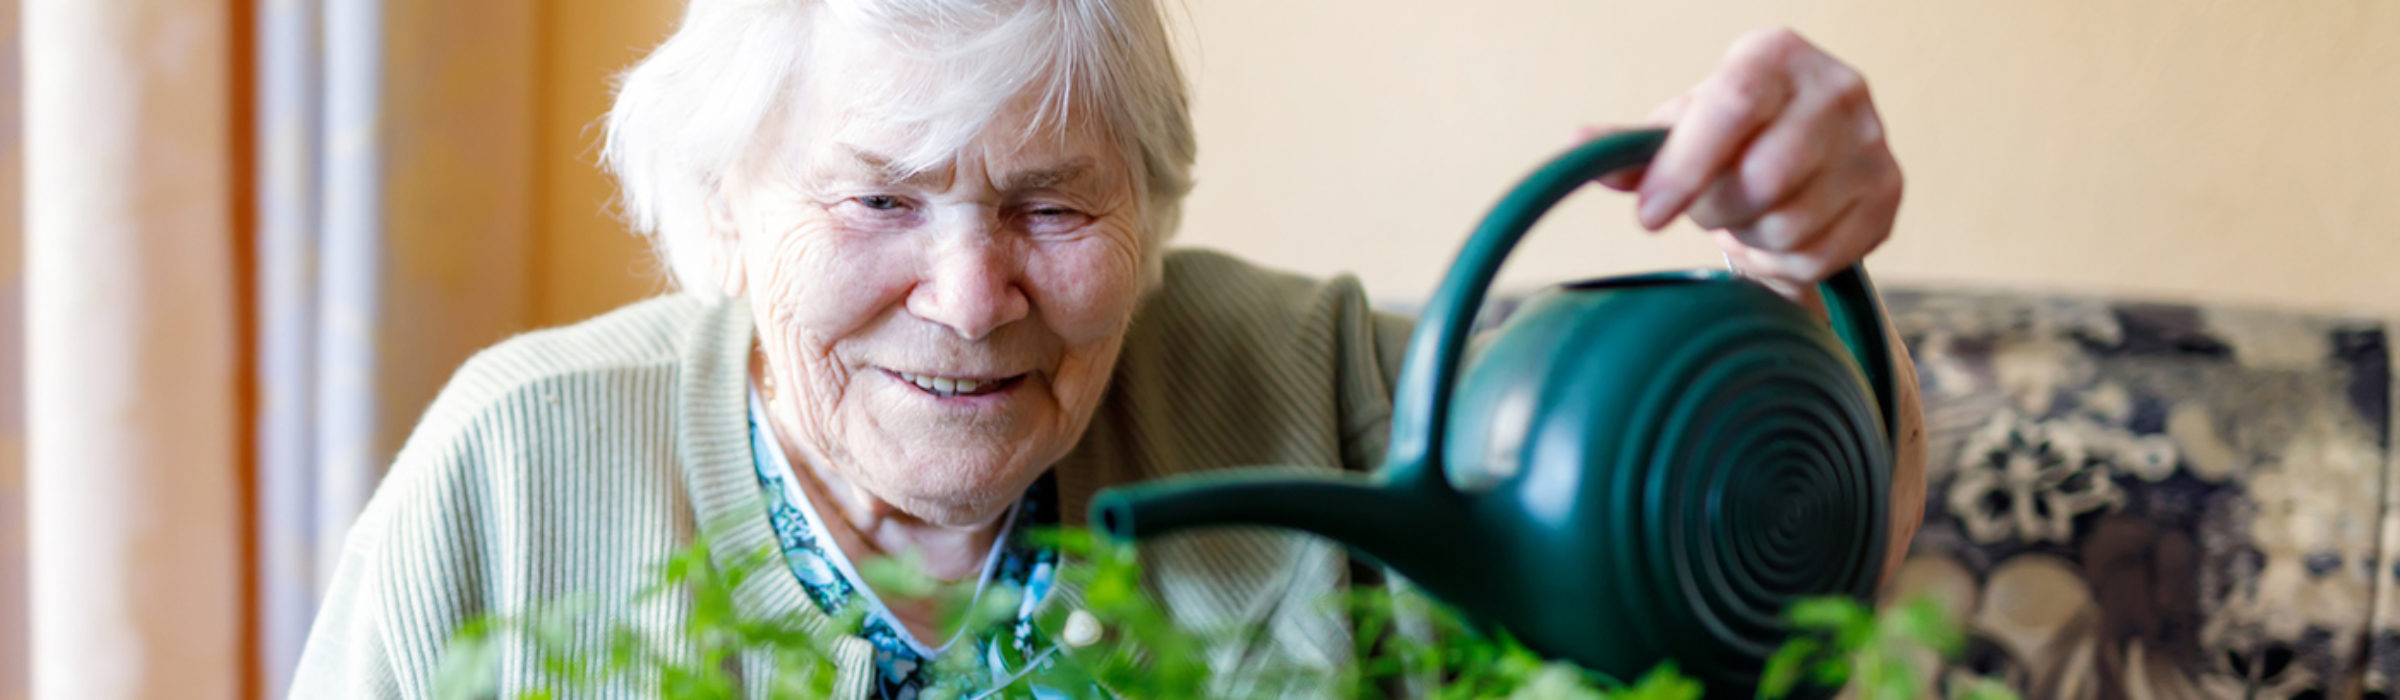 Memory care resident watering a planter filled with herbs